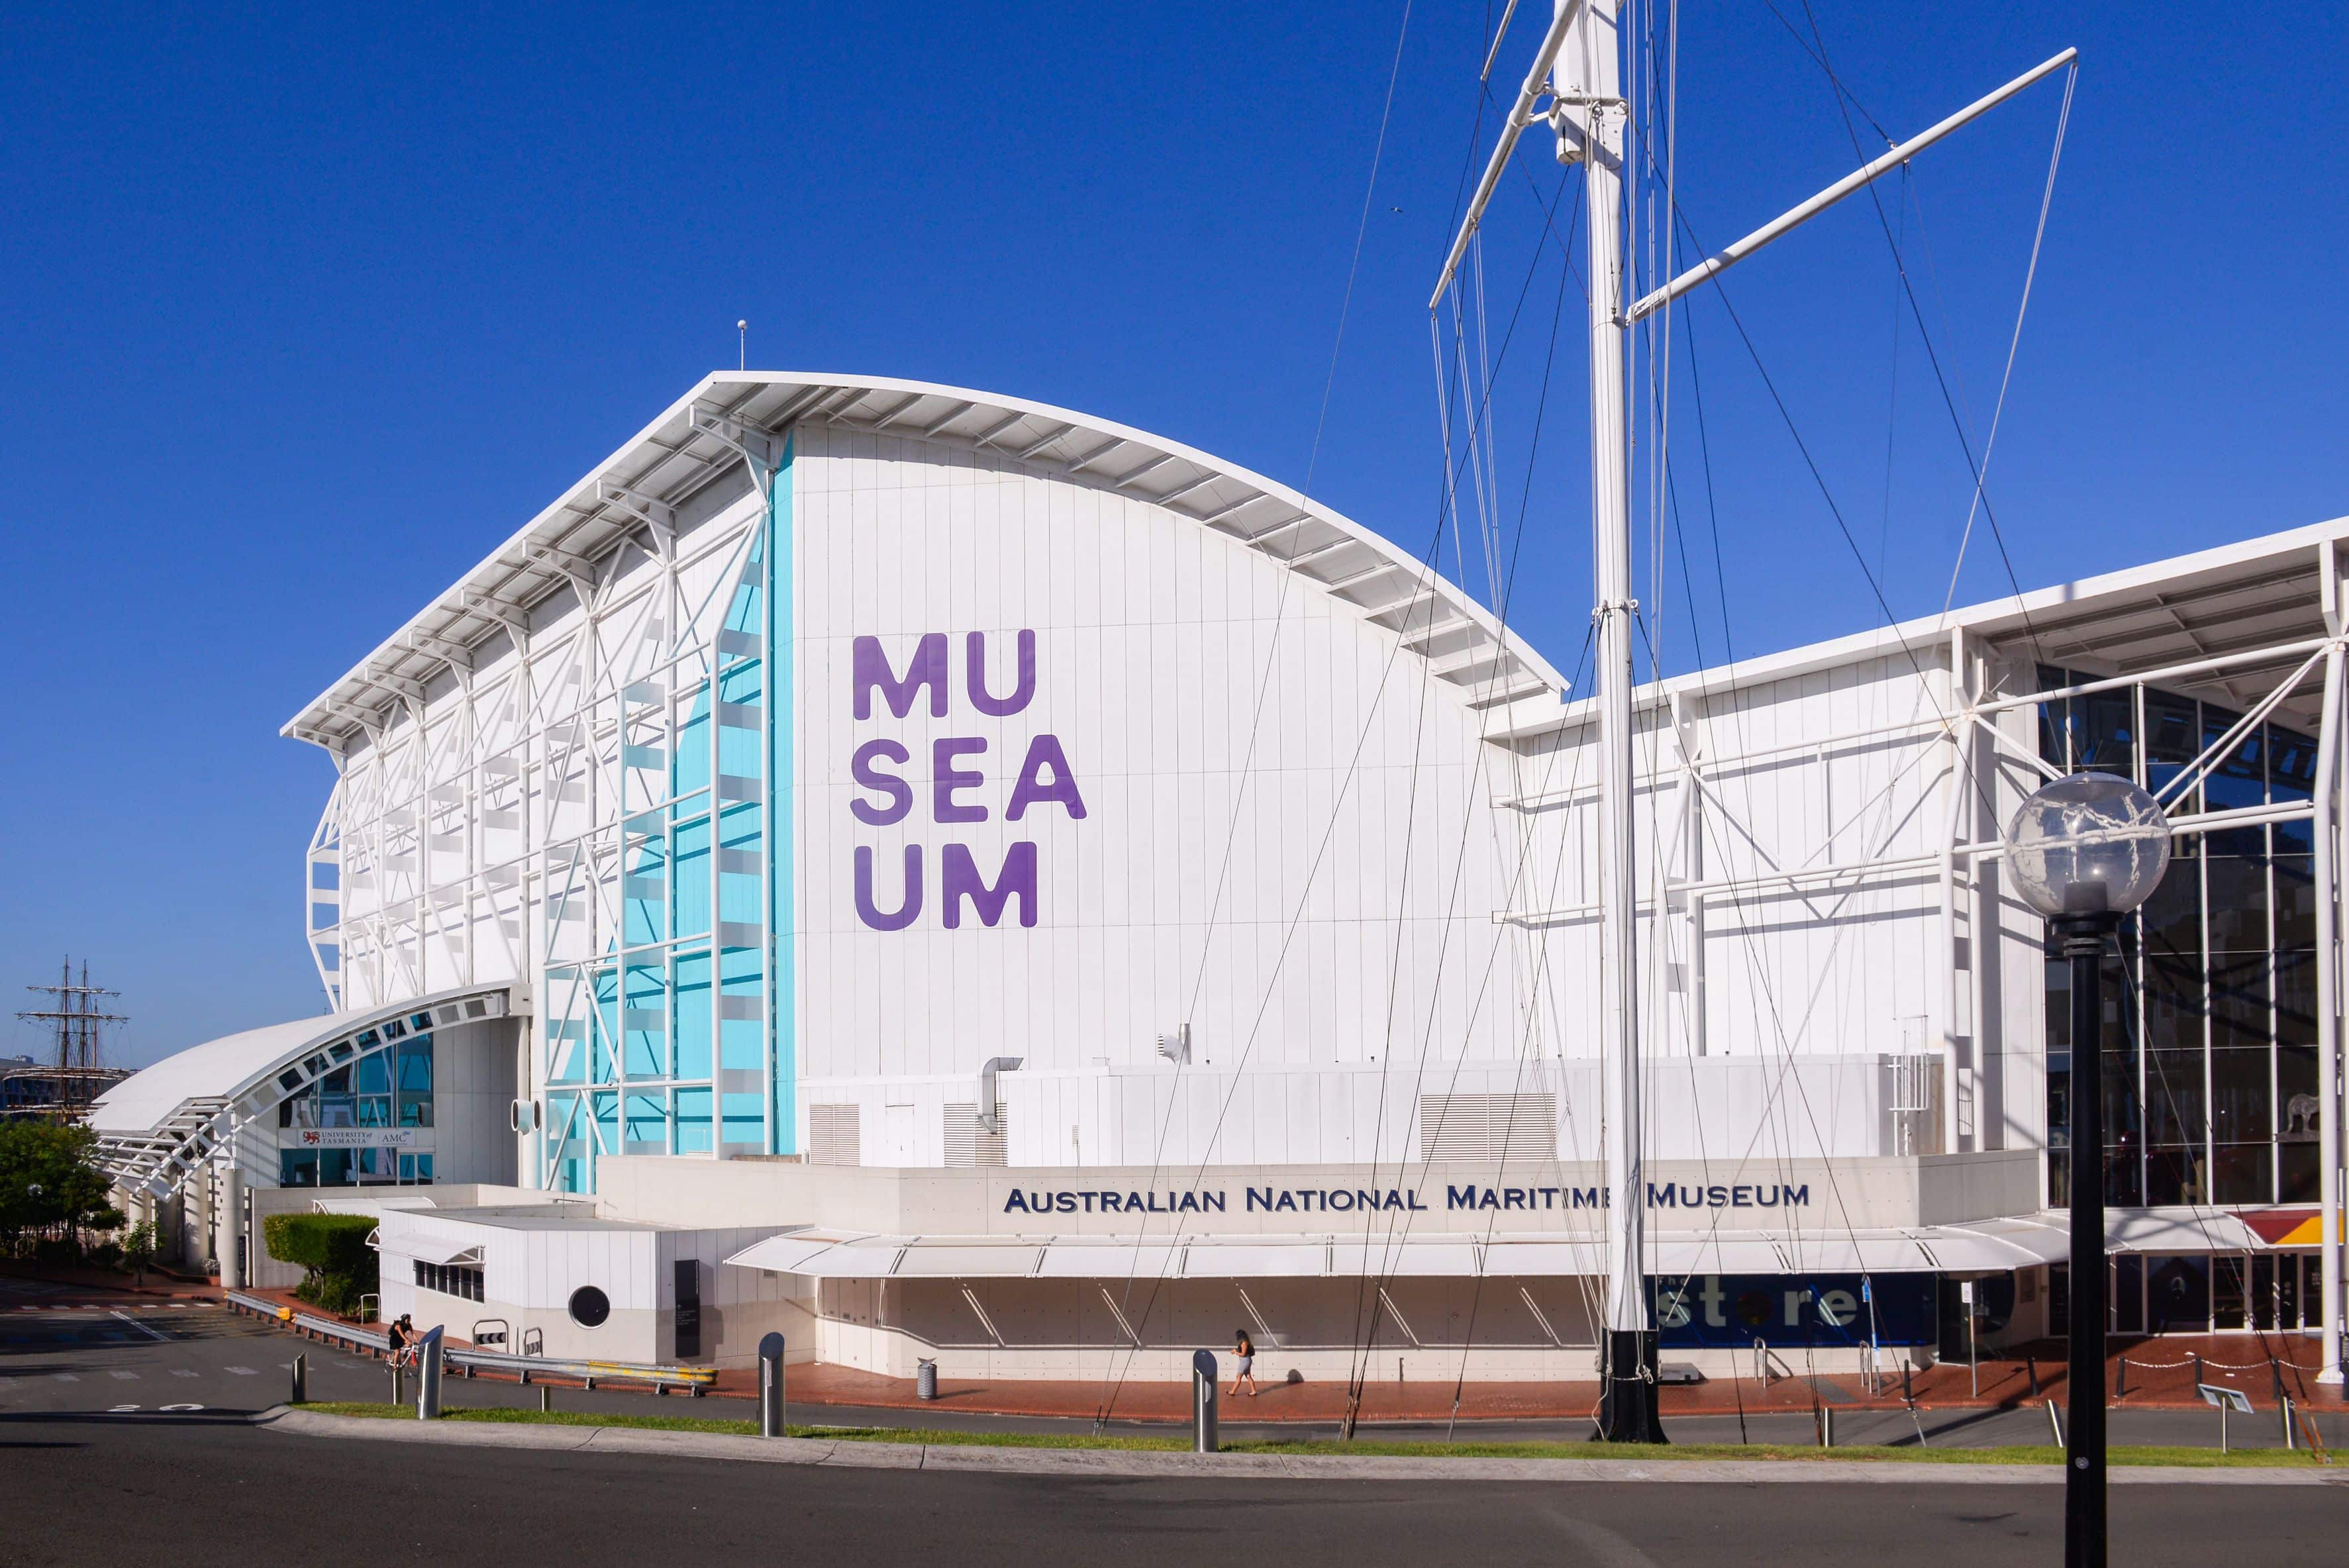 Sydney, NSW, Australia - January 04, 2019: The Australian National Maritime Museum, great attractions of visitors. The museum is a federally-operated maritime museum located in Darling Harbour.